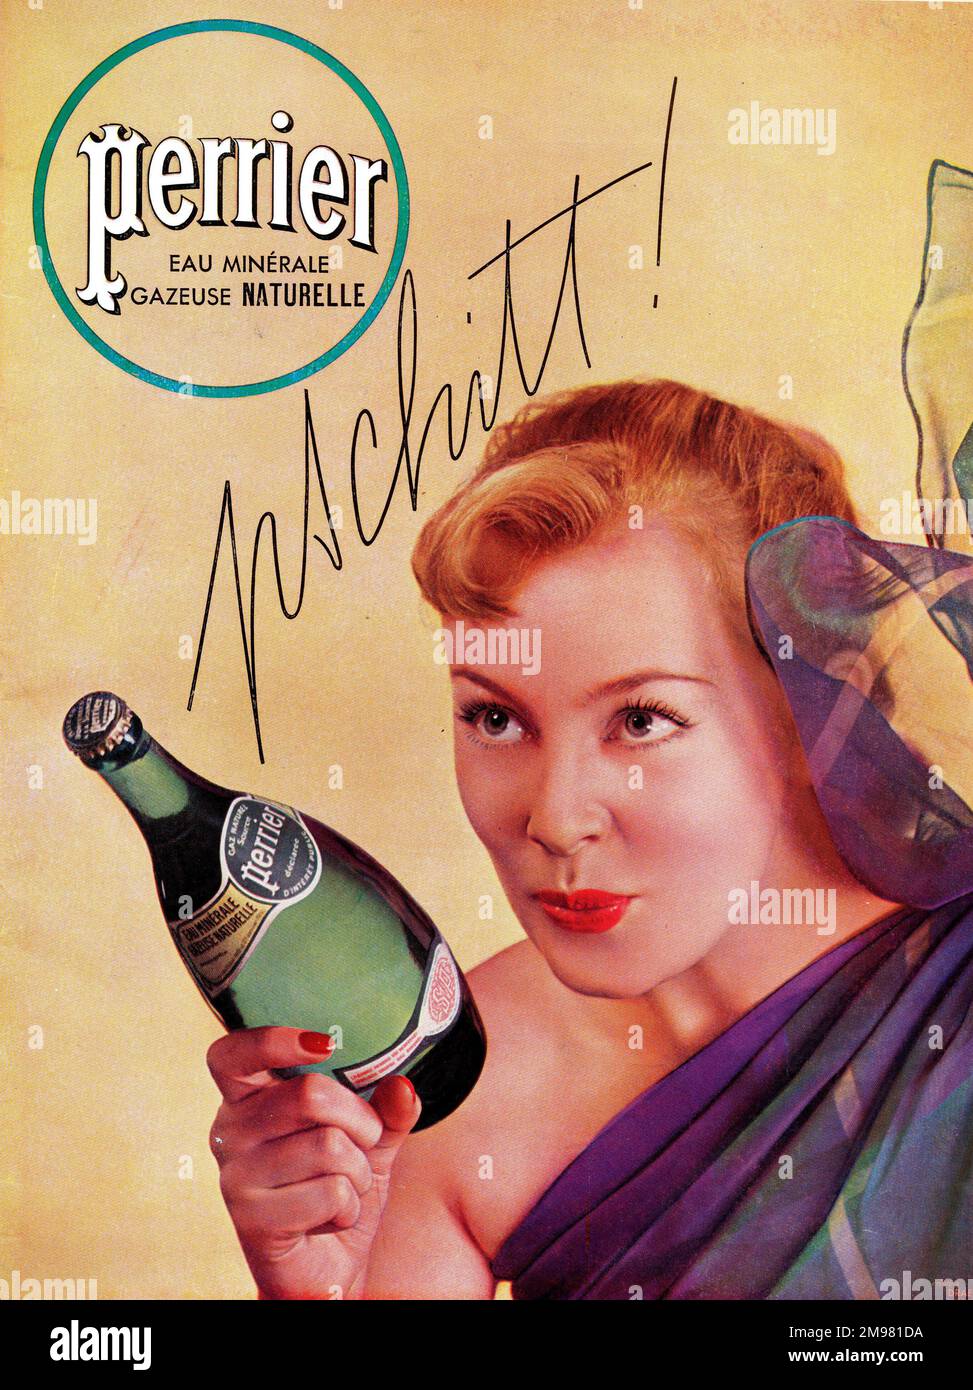 Advertisement for Perrier mineral water. Stock Photo